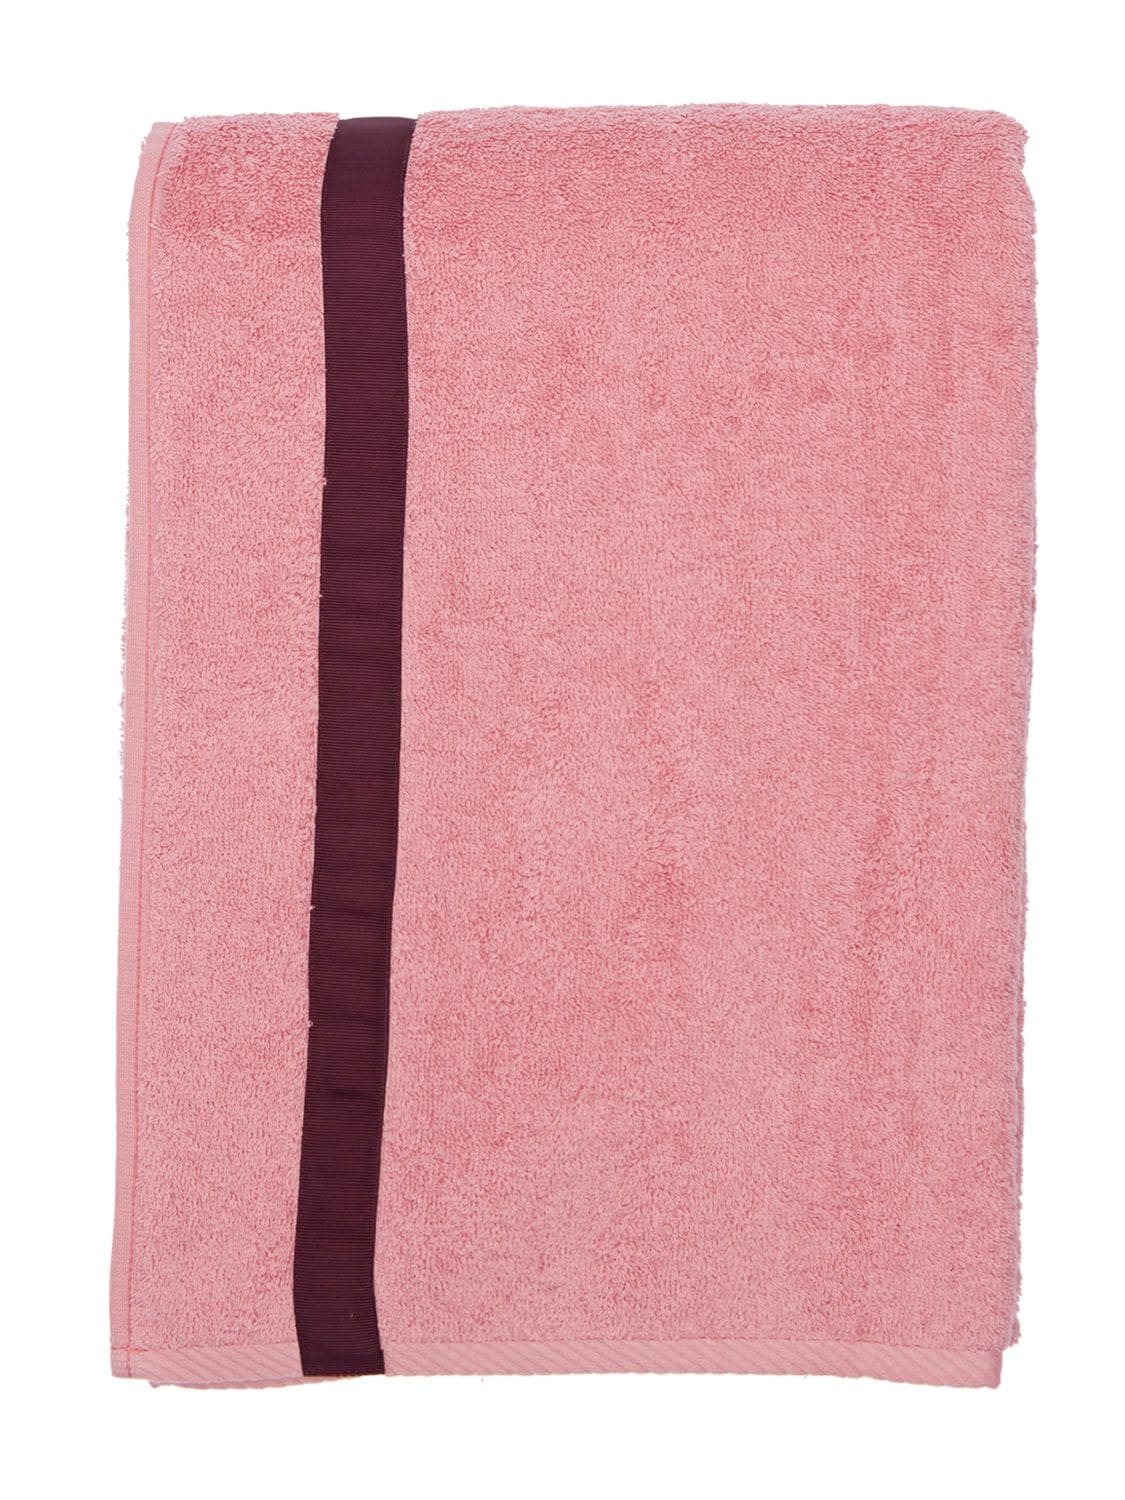 Alessandro Di Marco Cotton Terrycloth Bath Towel In Pink